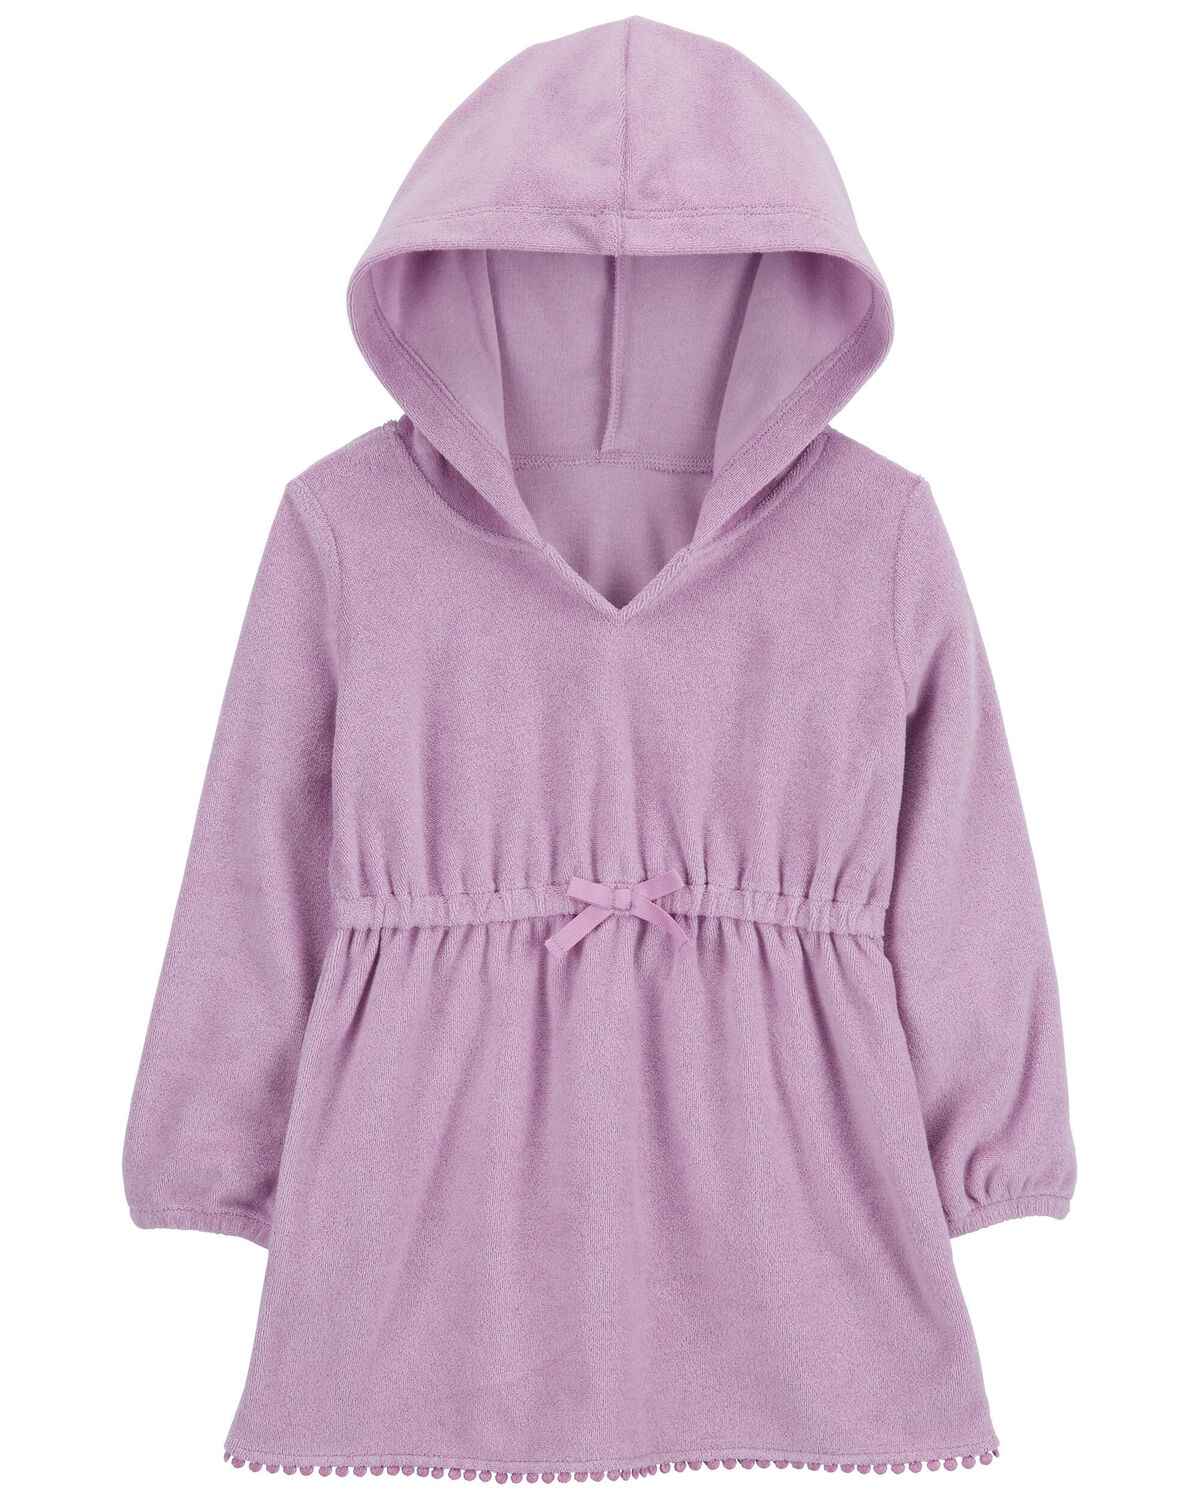 Purple Baby Terry Hooded Swimsuit Cover-Up